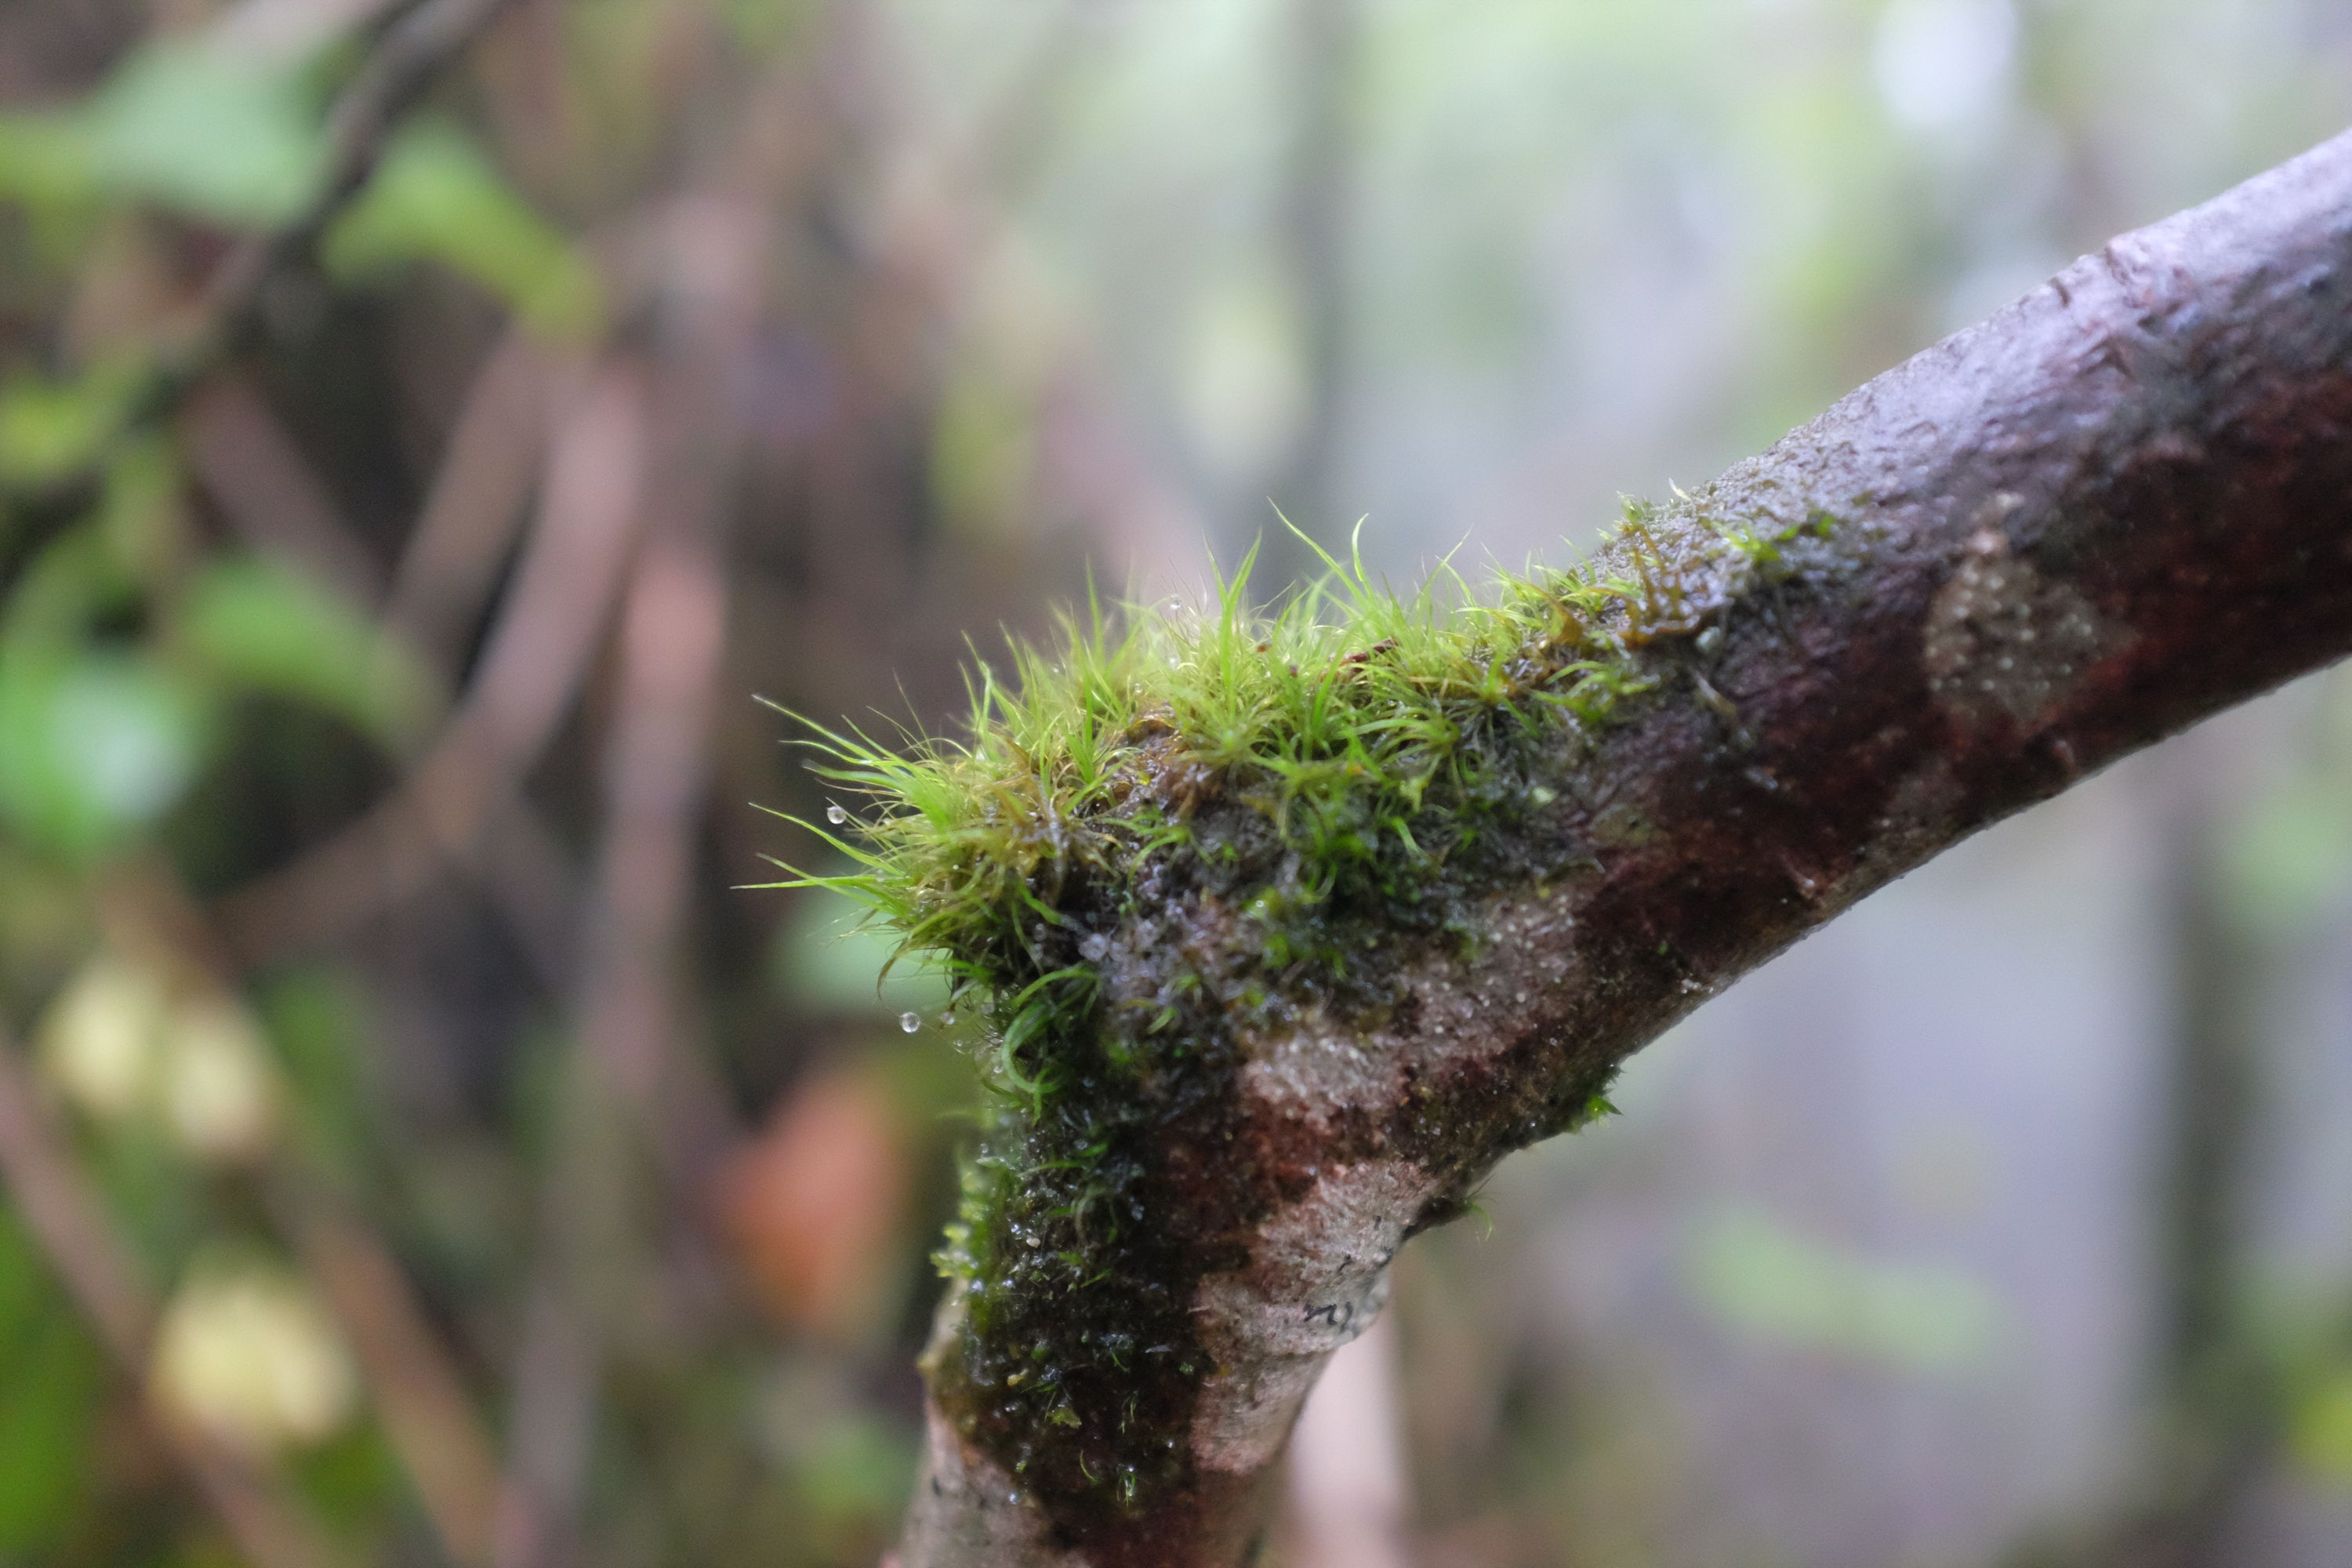 Moss growing on a branch.